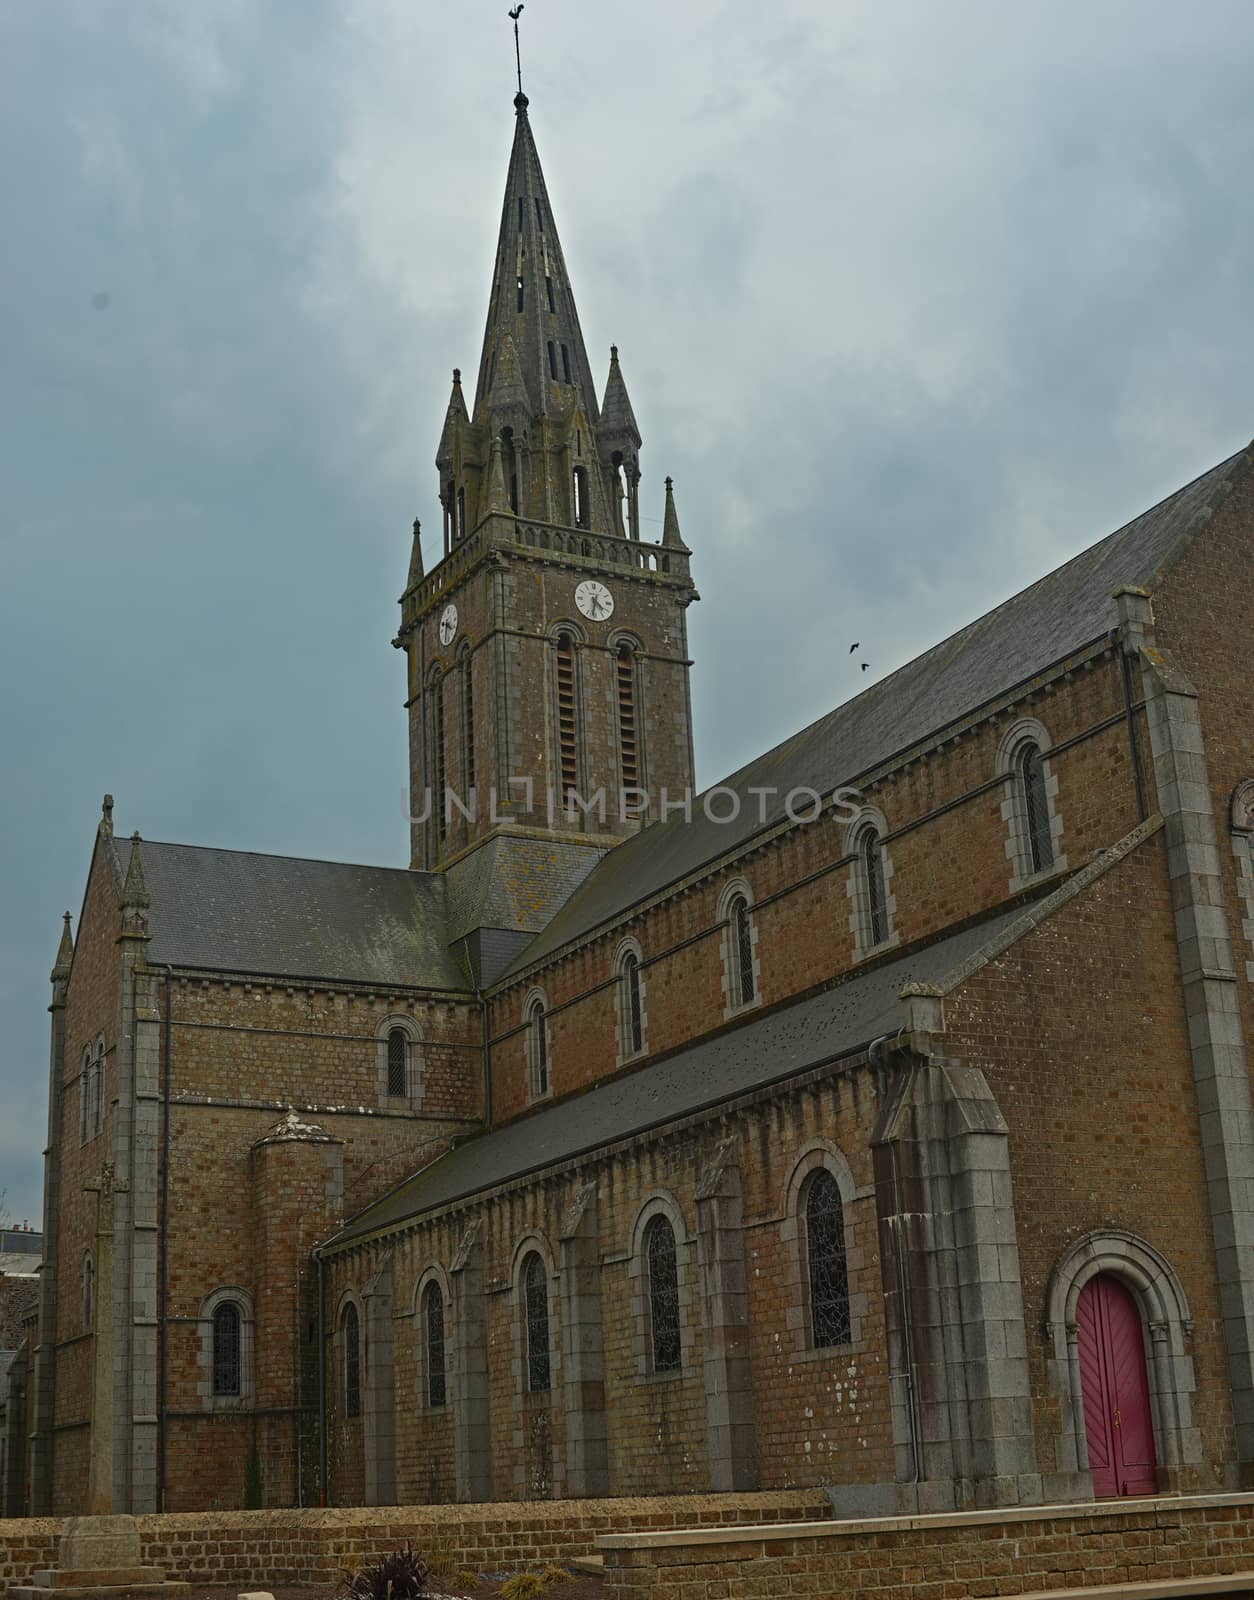 Big old stone Catholic cathedral in Sourdeval Normandy France by sheriffkule